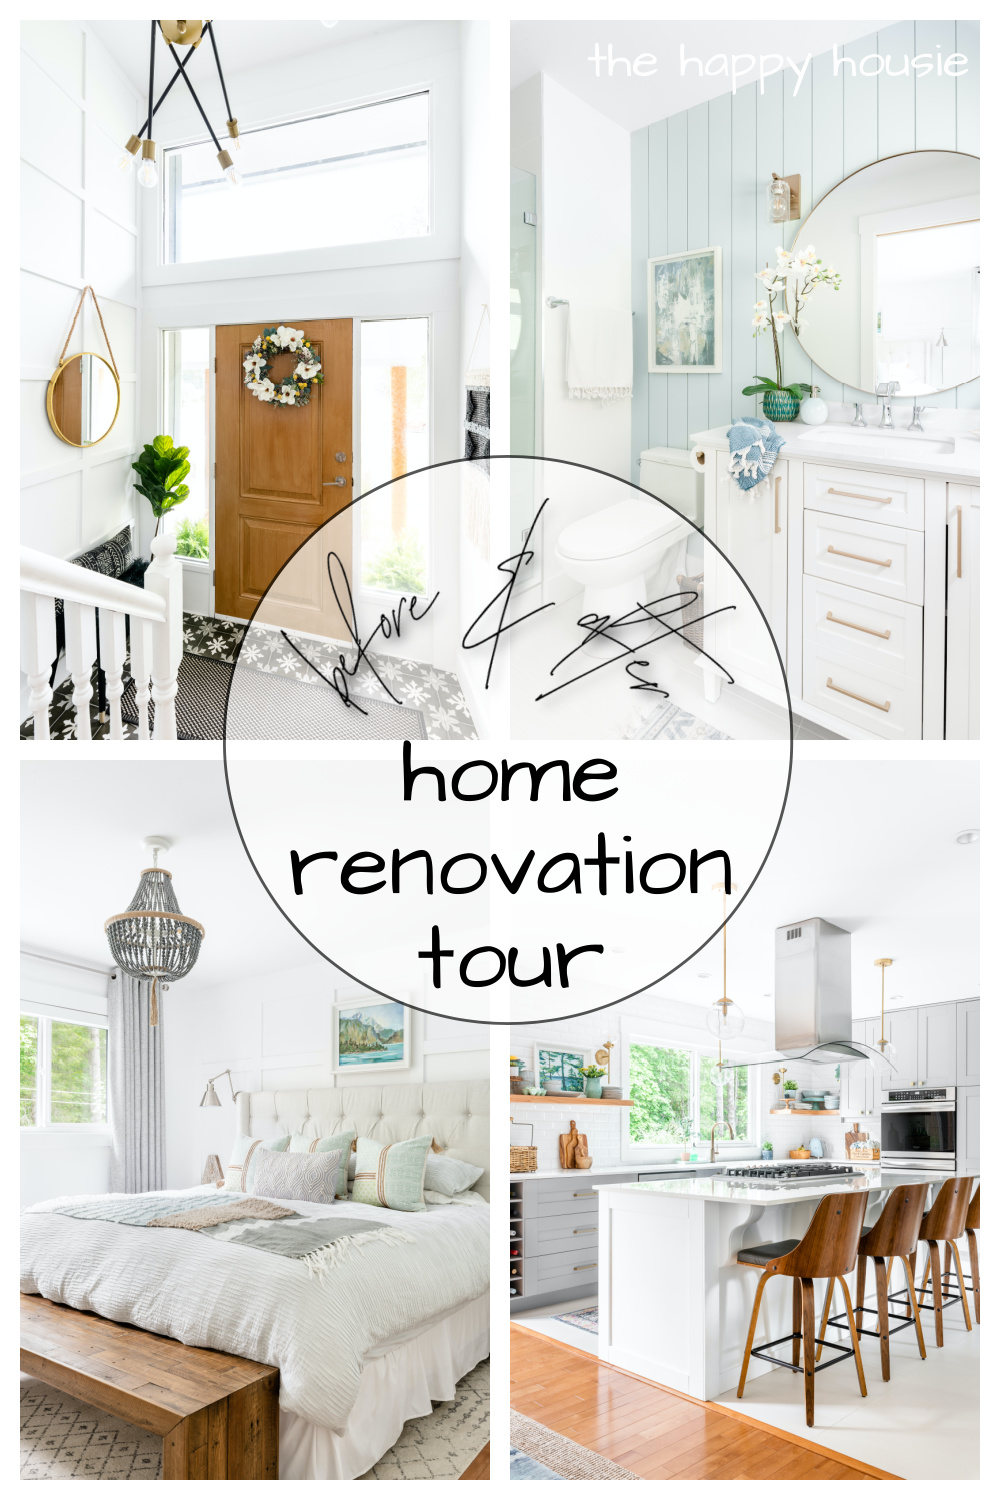 Mobile Home Decorating: An Interior Design Guide | MHVillage